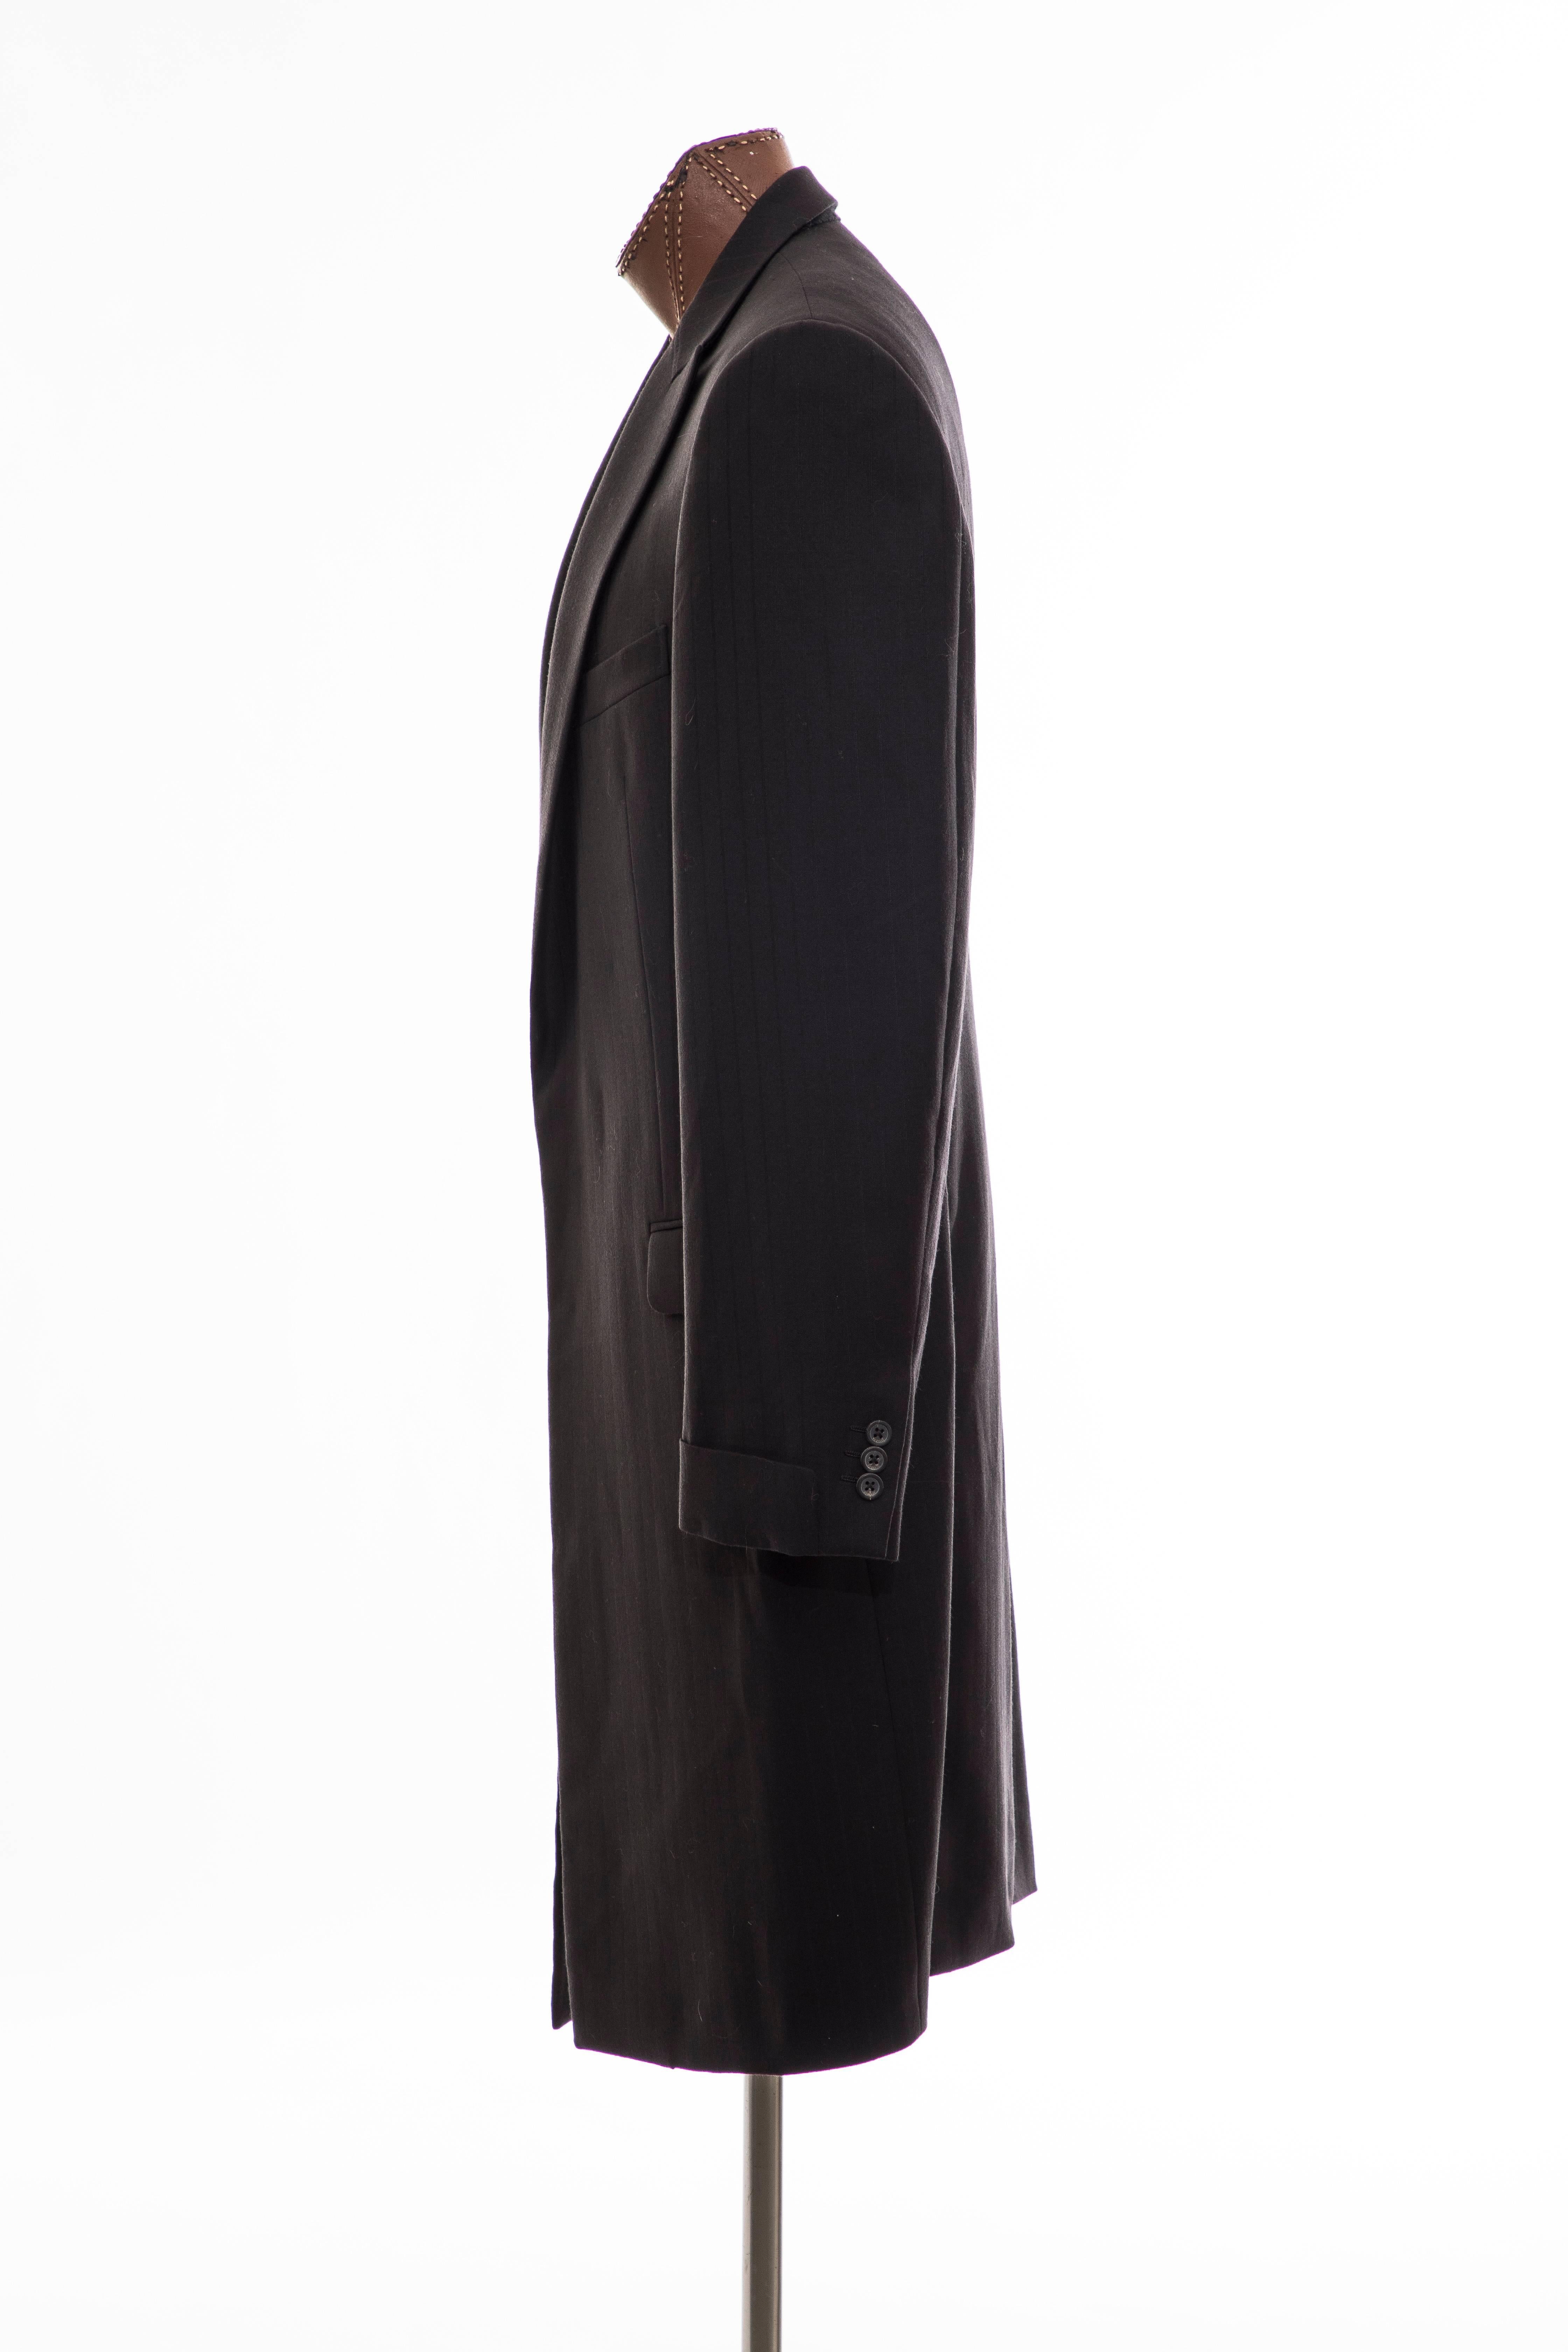 Gianni Versace Couture Men's Black Pinstriped Wool Overcoat, Circa 1990's For Sale 2